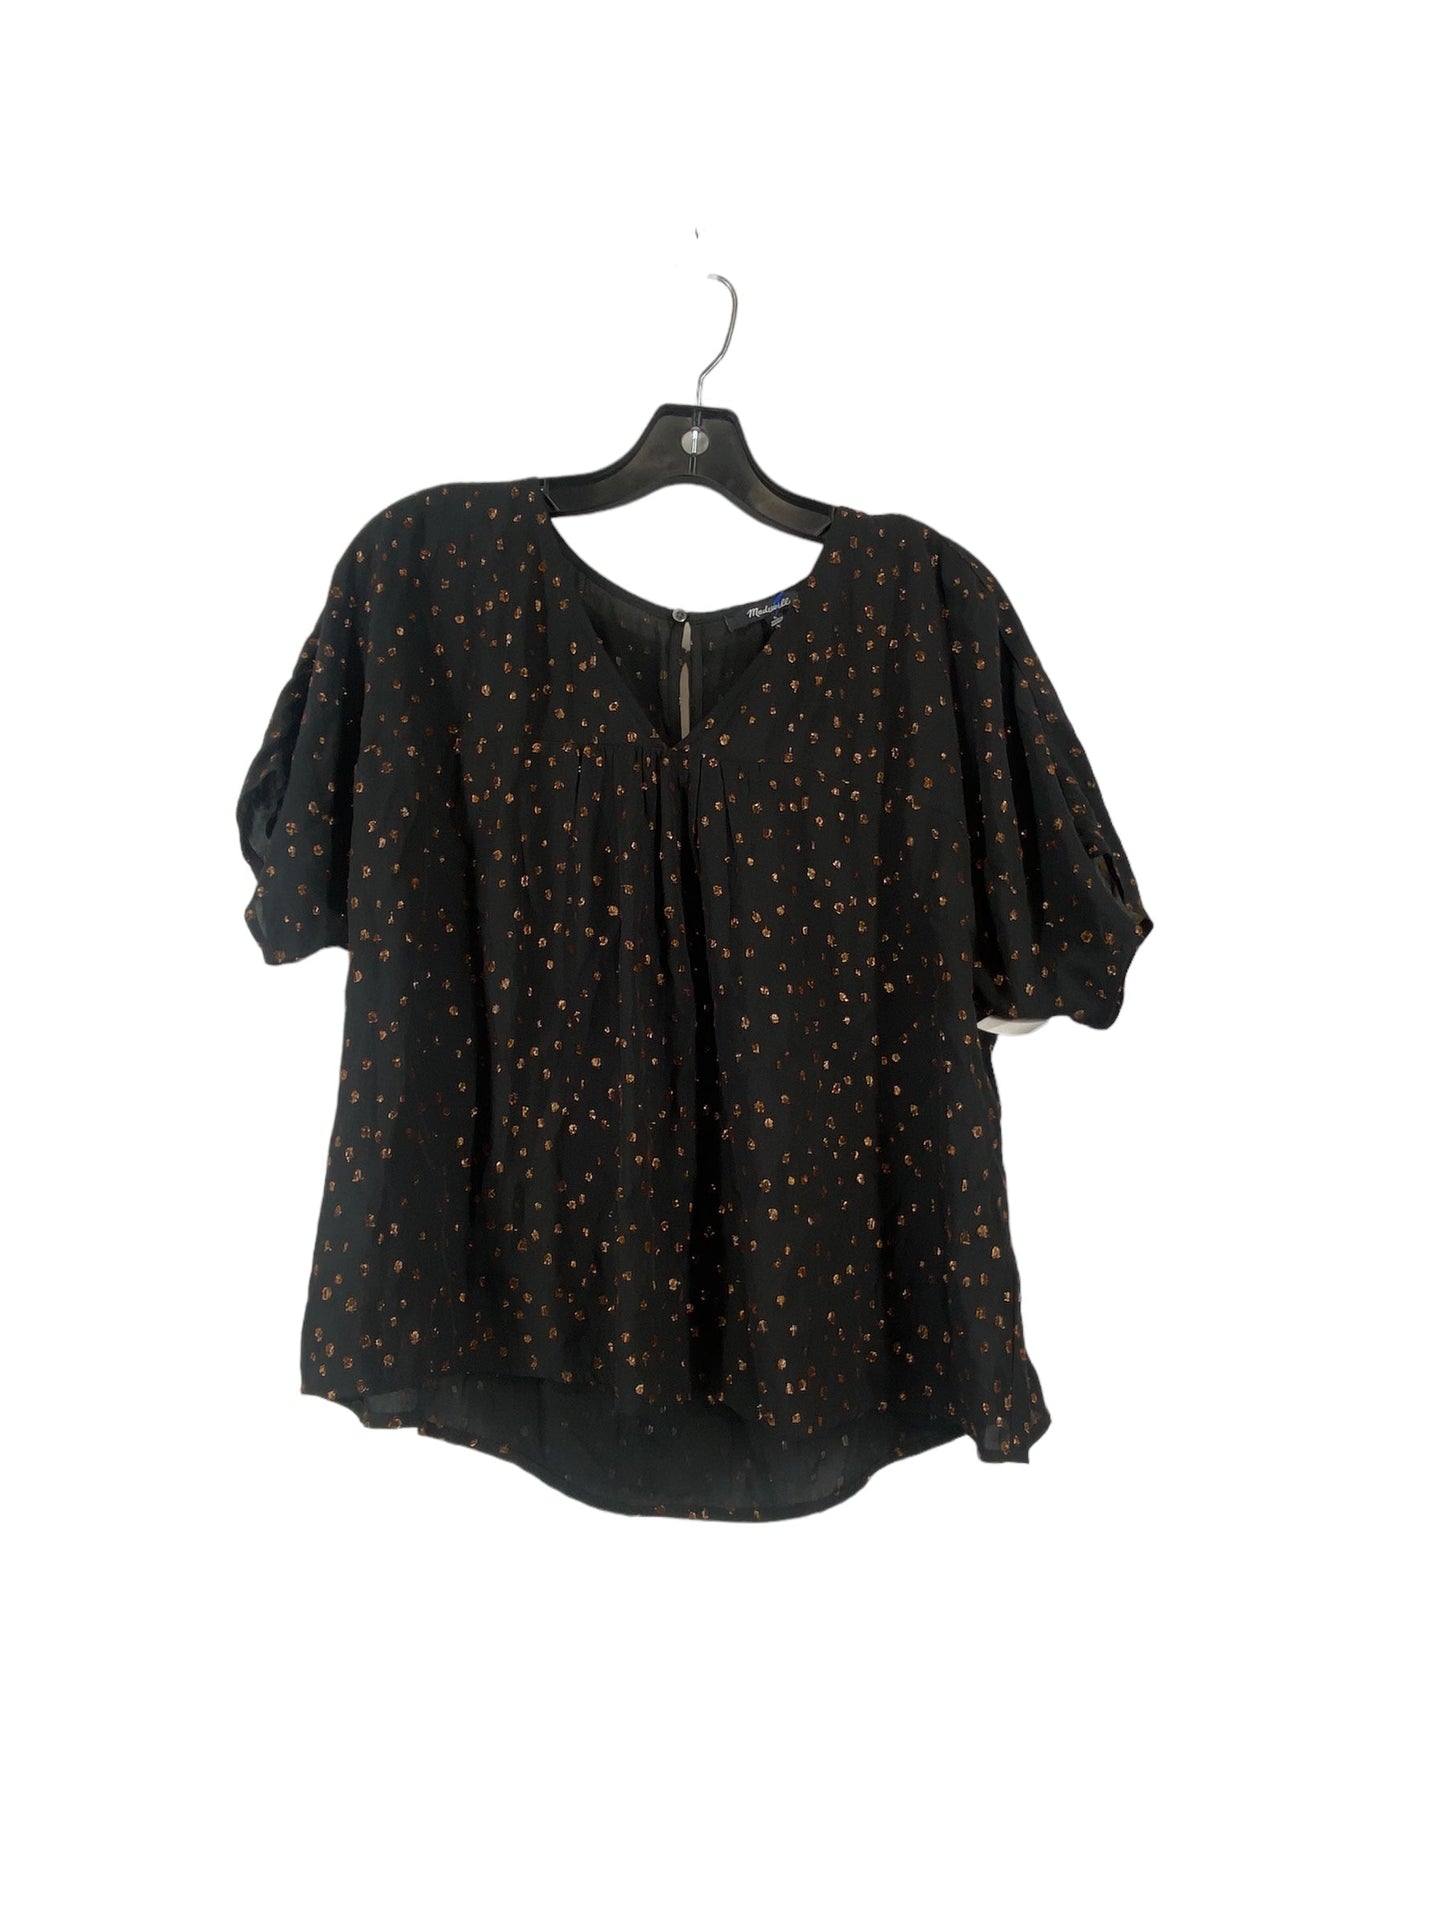 Black Top Short Sleeve Madewell, Size S